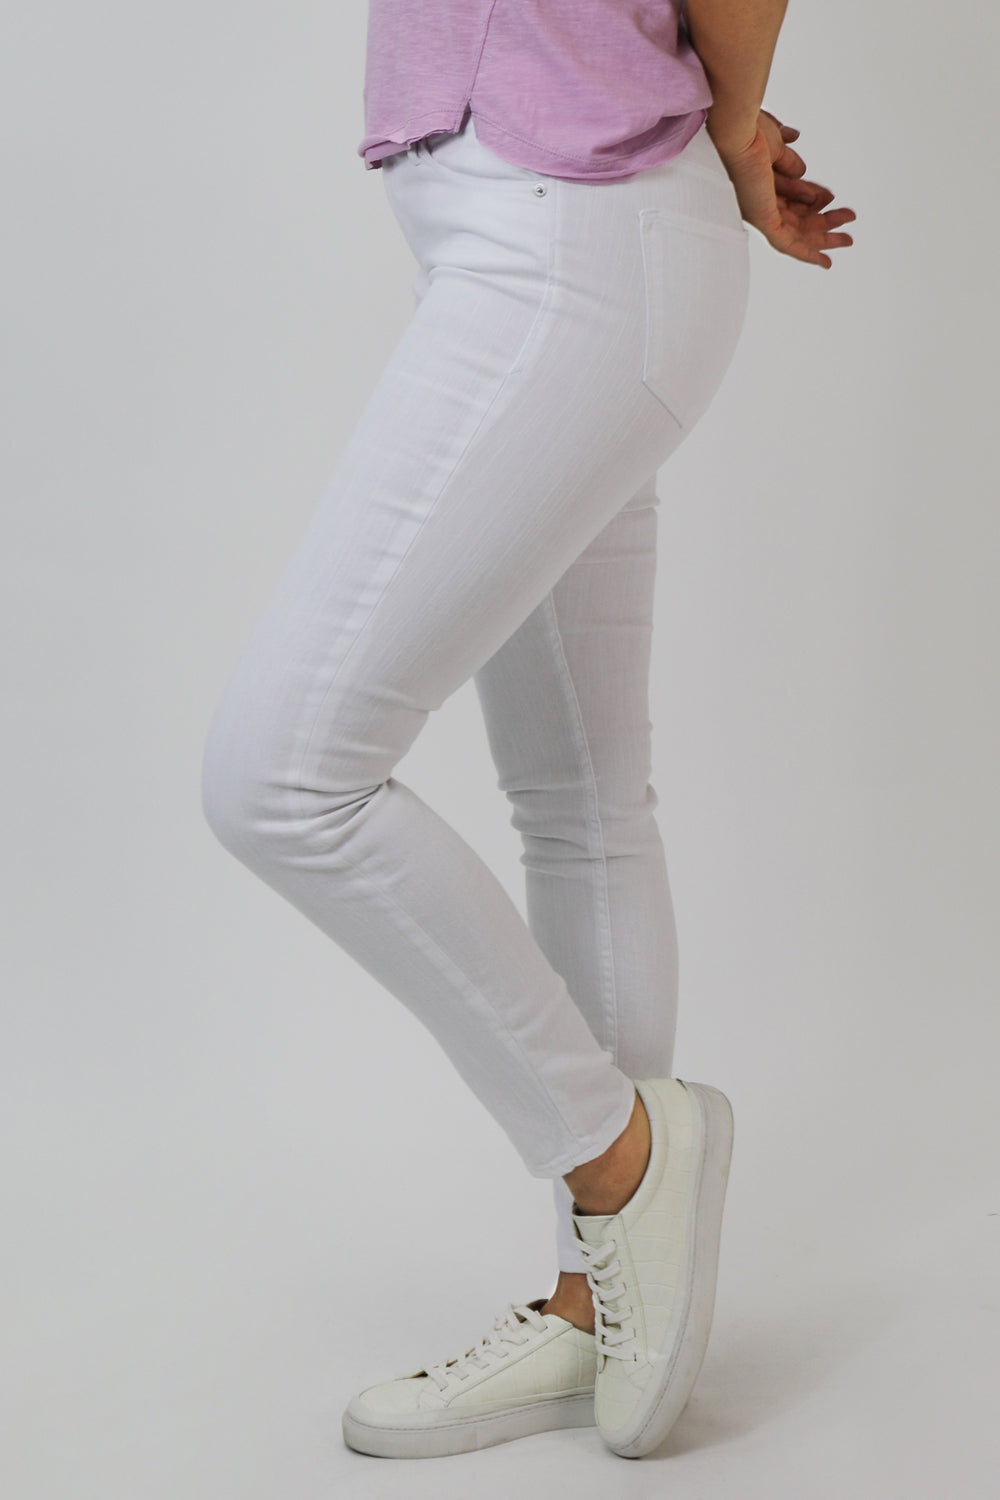 image of a female model wearing a BLAIRE HIGH RISE ANKLE SLIM STRAIGHT JEANS OPTIC WHITE DEAR JOHN DENIM 